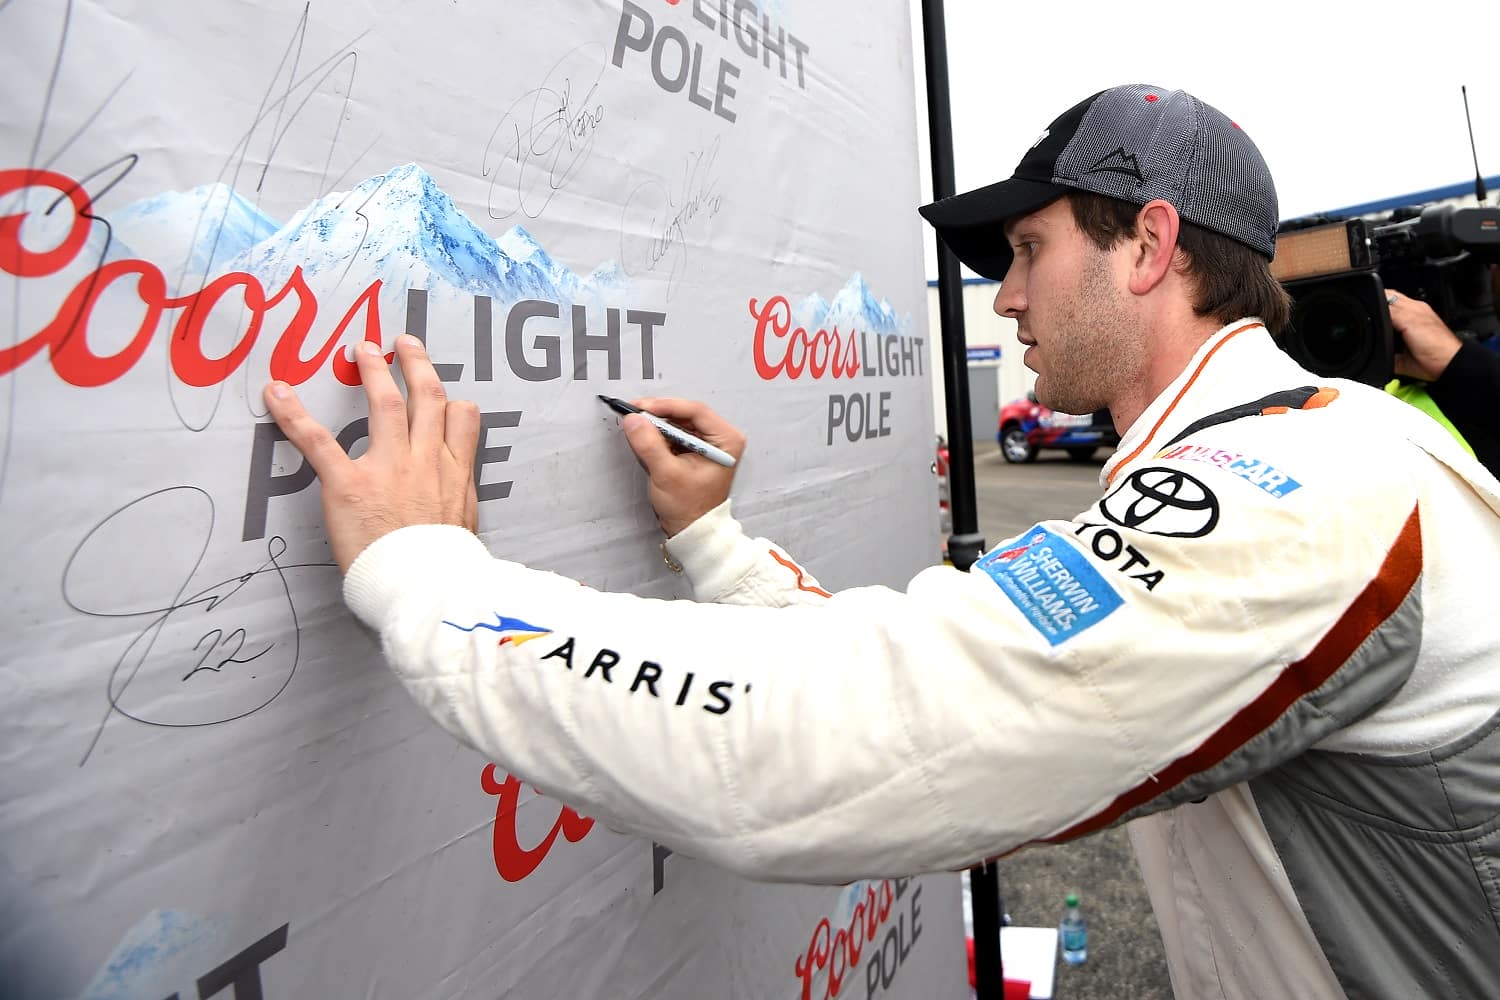 Daniel Suarez  signs the Coors Light Pole Award backdrop after qualifying on pole position for the NASCAR Xfinity Series Visitmyrtlebeach.com 300 at Kentucky Speedway on Sept. 26, 2015. | Rainier Ehrhardt/NASCAR via Getty Images